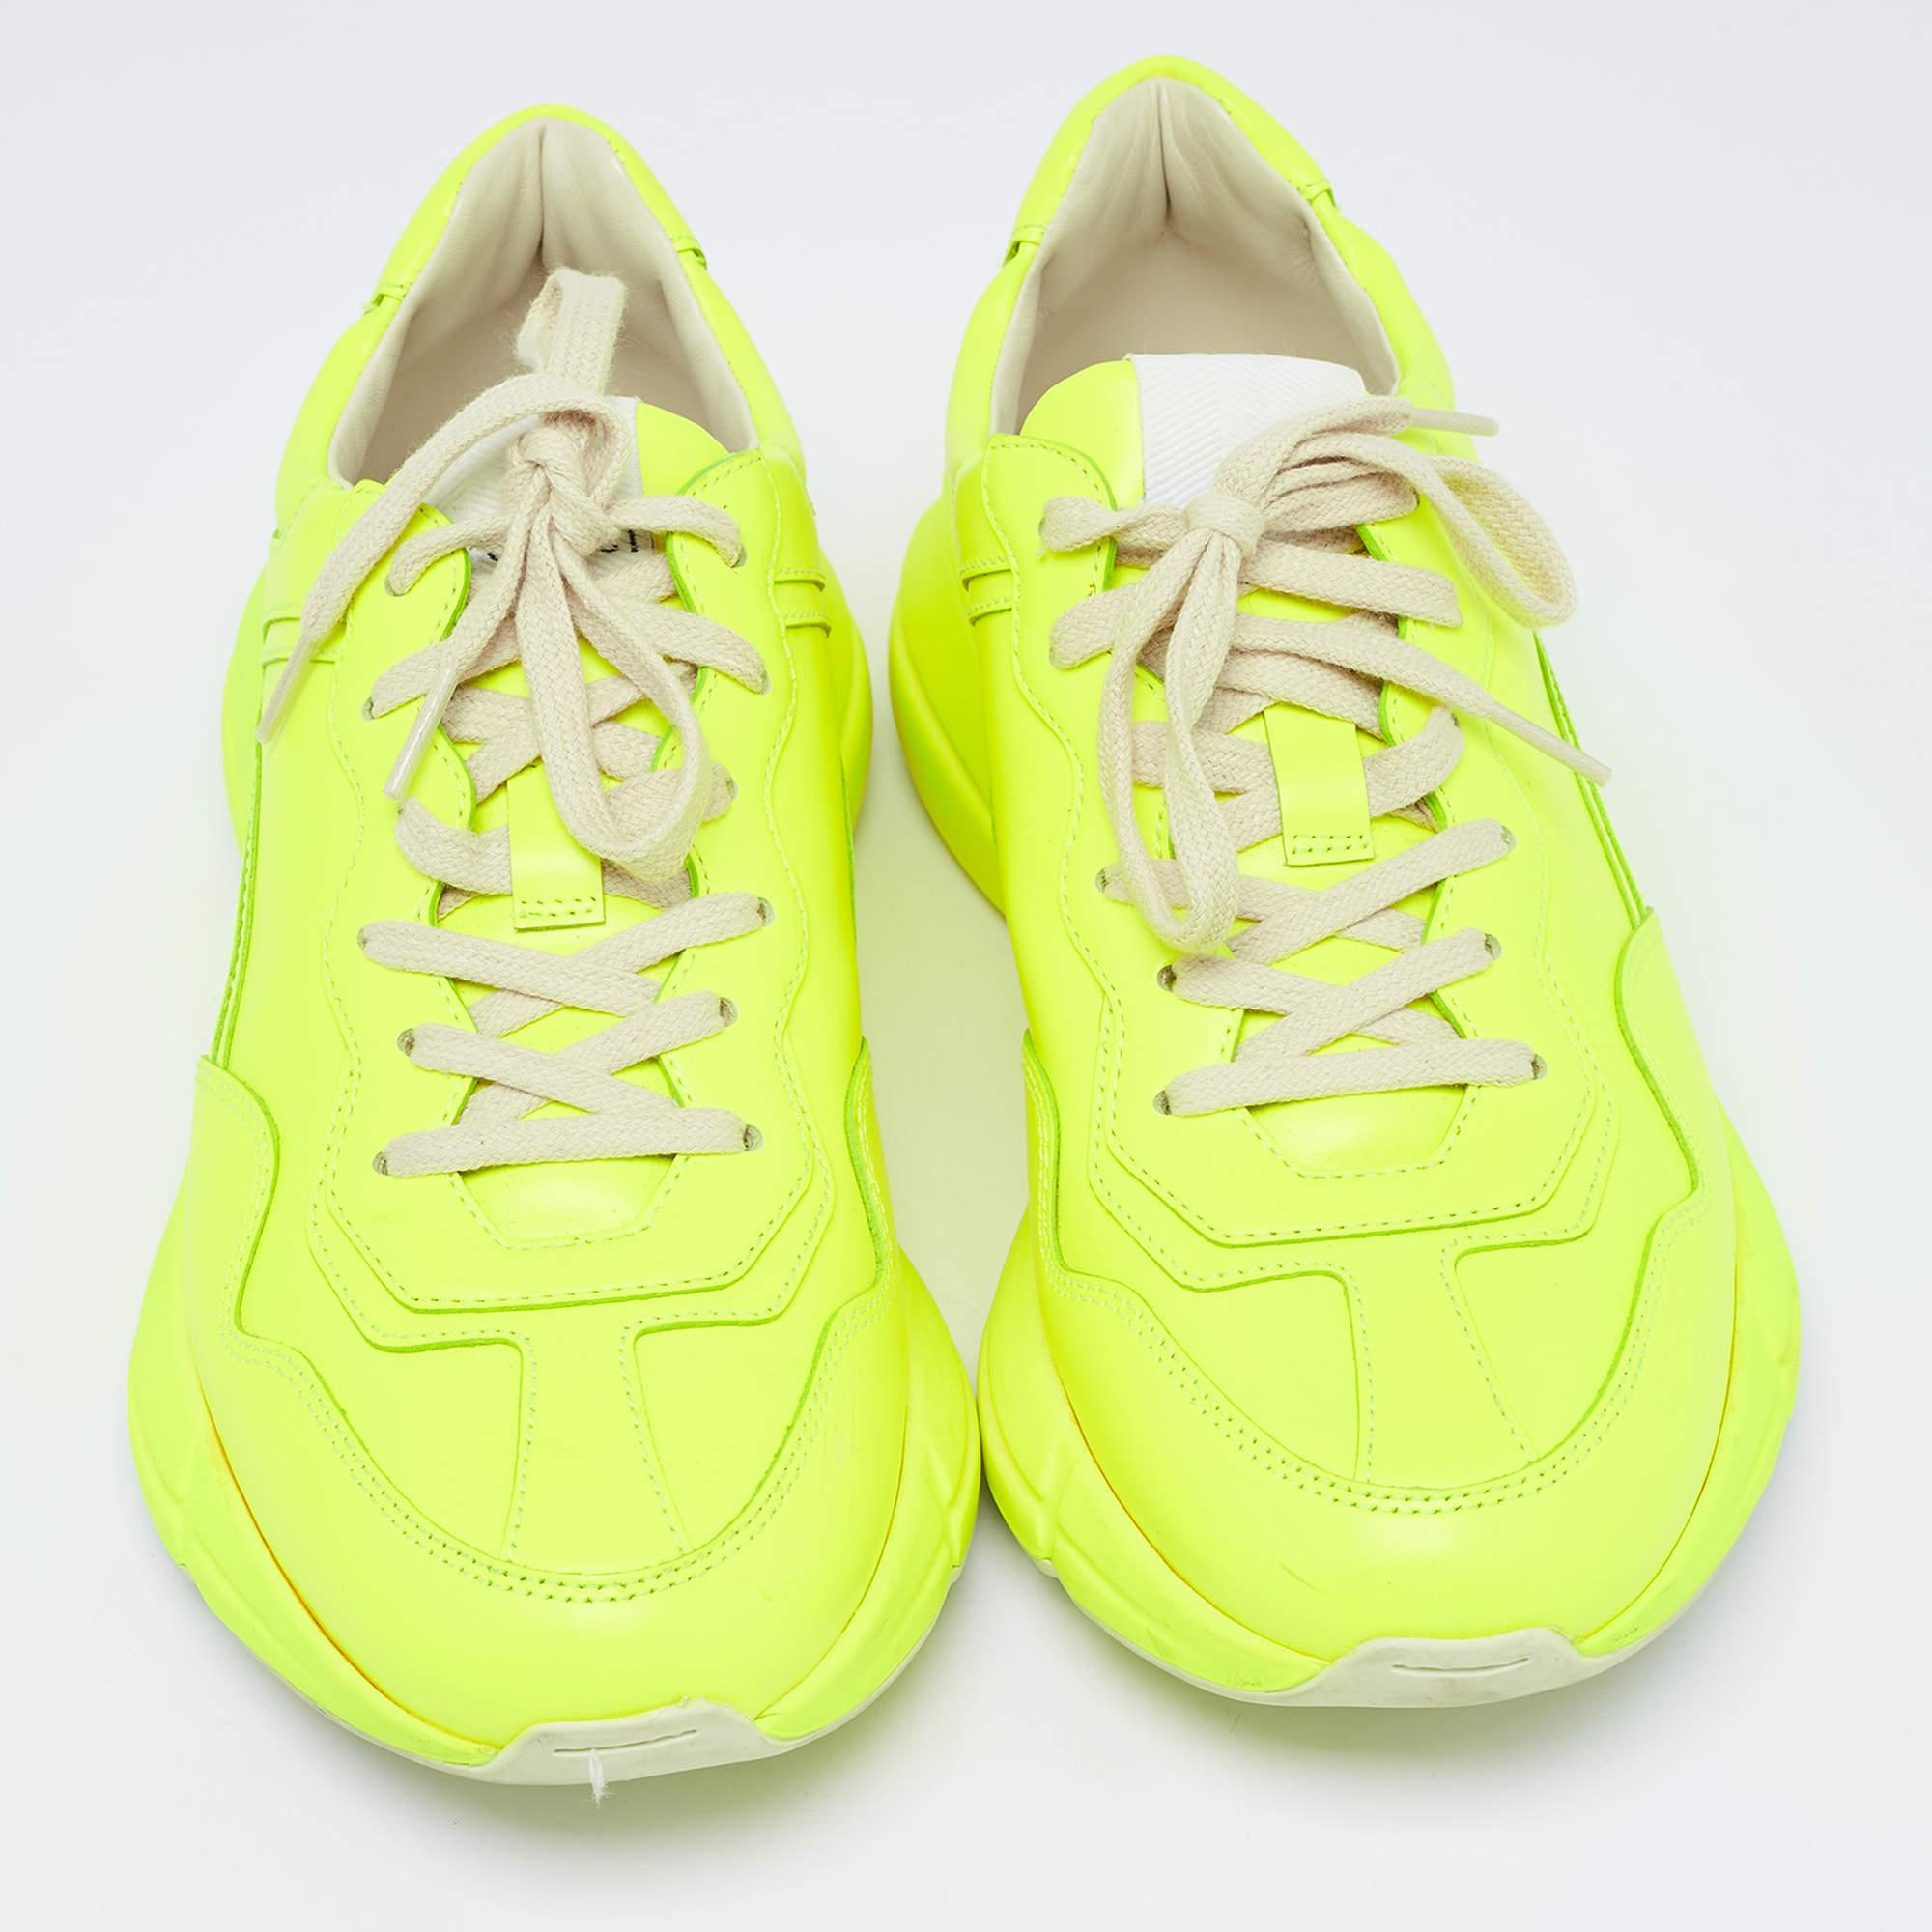 Add a statement appeal to your outfit with these Gucci neon yellow sneakers. Made from premium materials, they feature lace-up vamps, and relaxing footbeds. The rubber sole of this pair aims to provide you with everyday ease.

